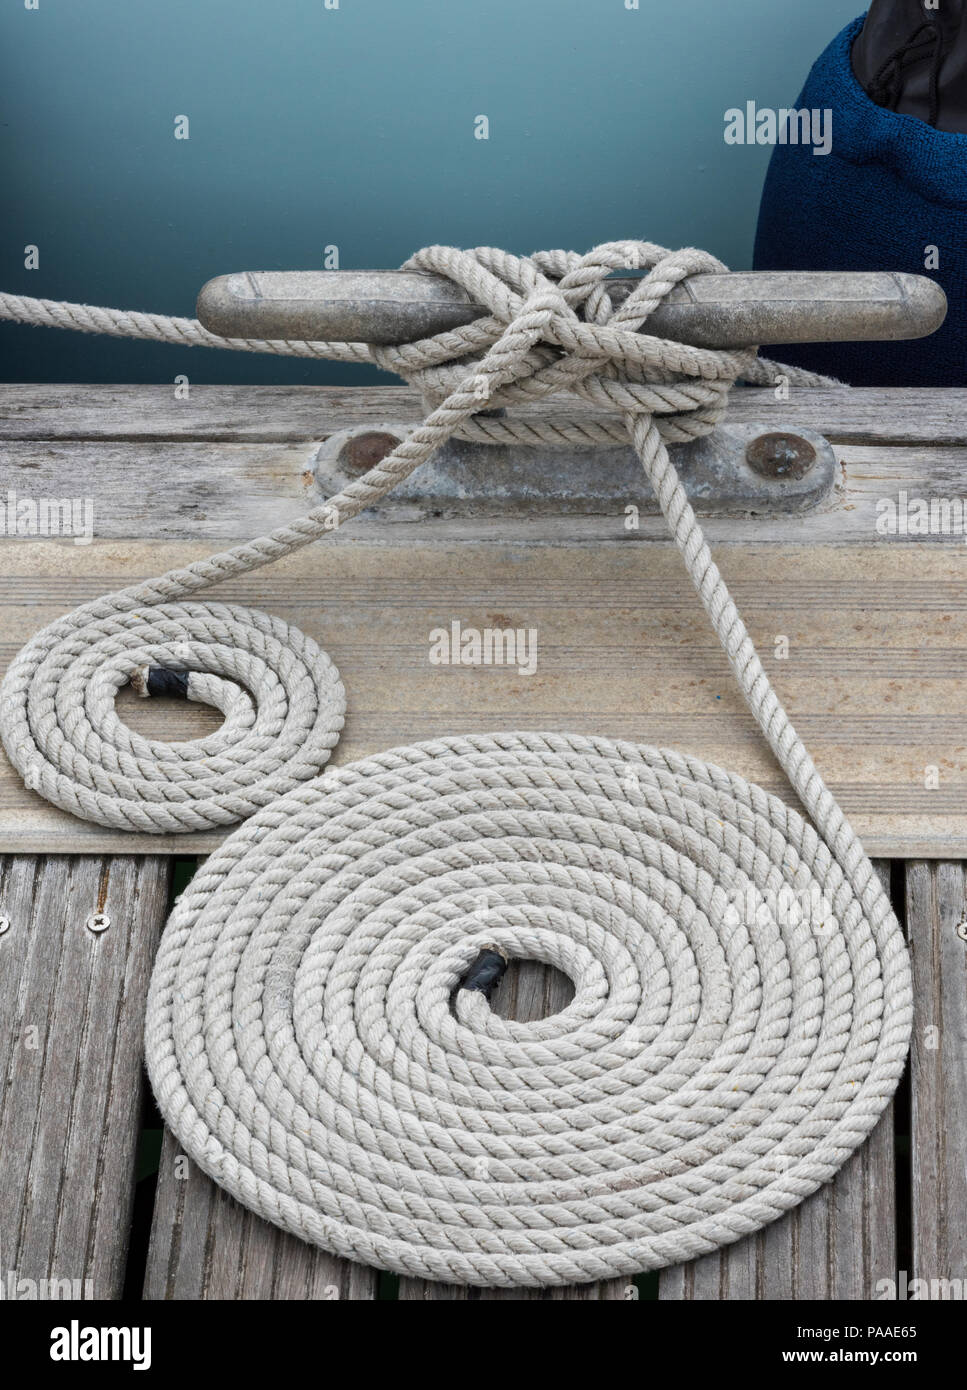 neatly coiled rope on a wooden jetty in a yacht marina. Rope